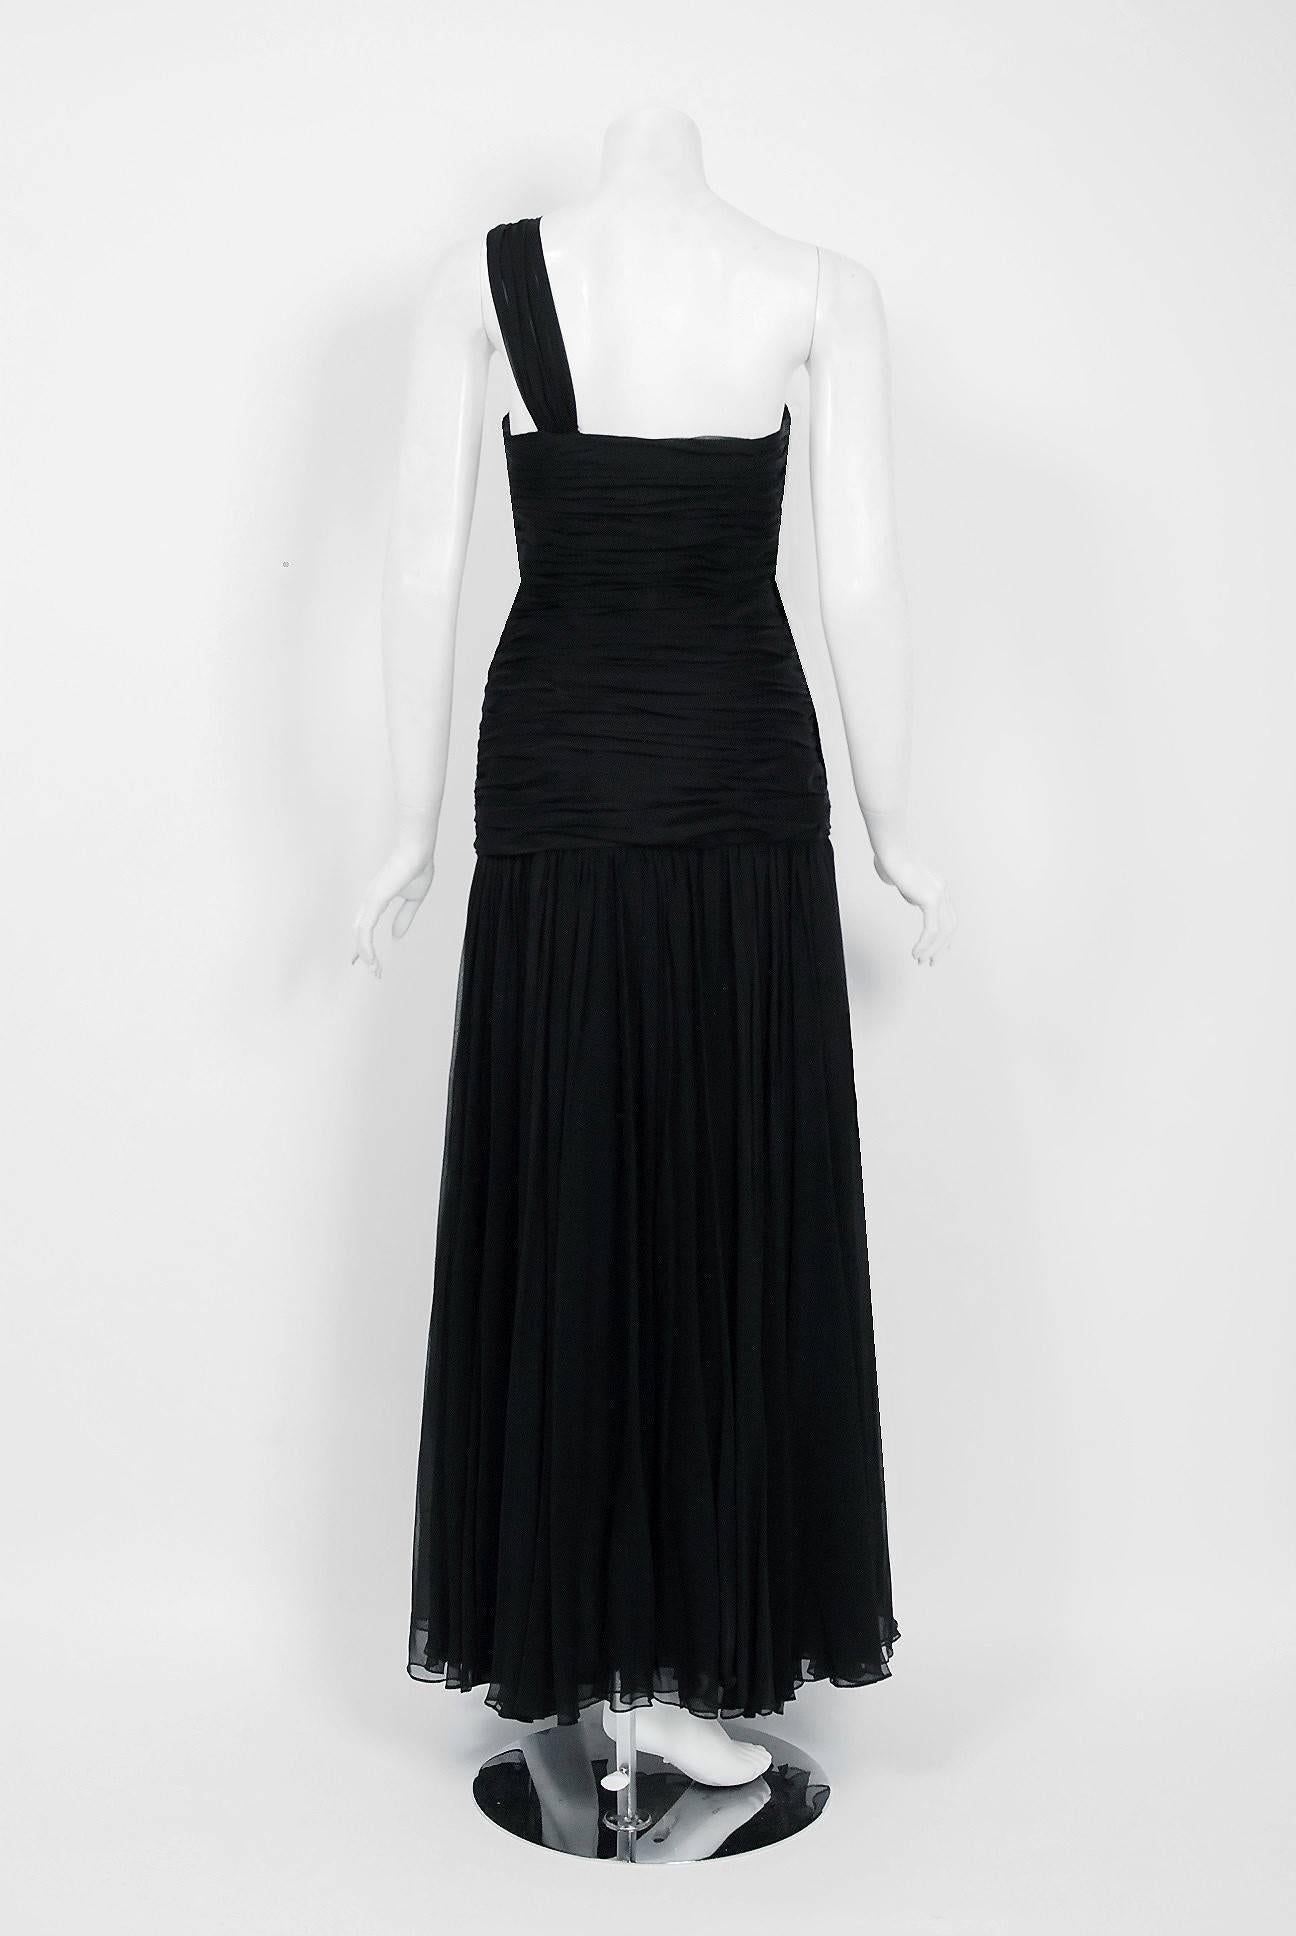 Vintage 1970's Adele Simpson Black Draped Silk Chiffon One-Shoulder Goddess Gown In Good Condition For Sale In Beverly Hills, CA